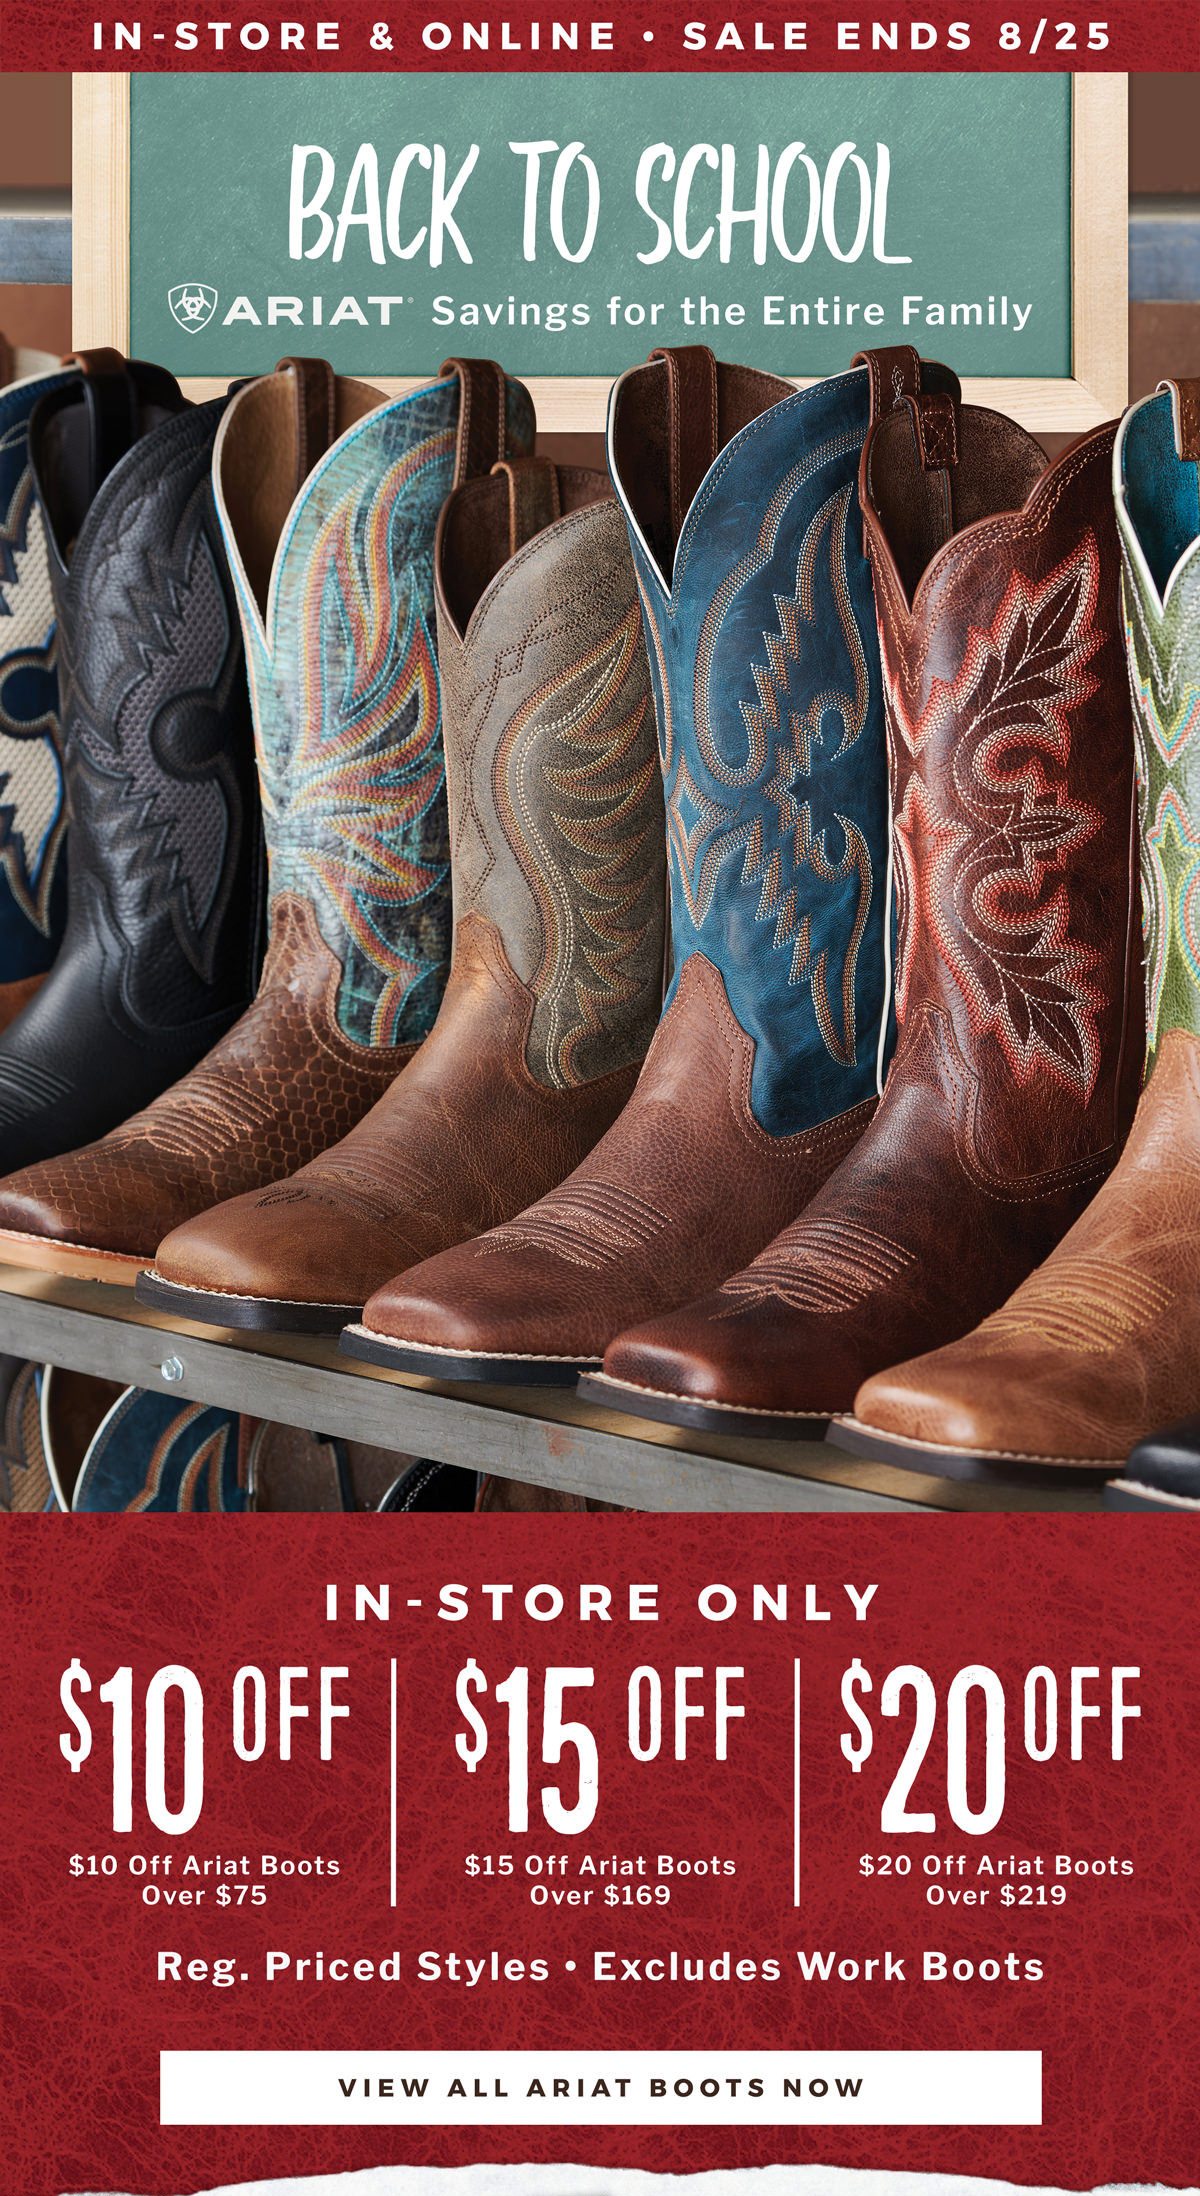 Ariat Men's & Ladies' Boots - $10 Off $75+ | $15 Off $169+ | $20 Off $219+ | In-Store Only